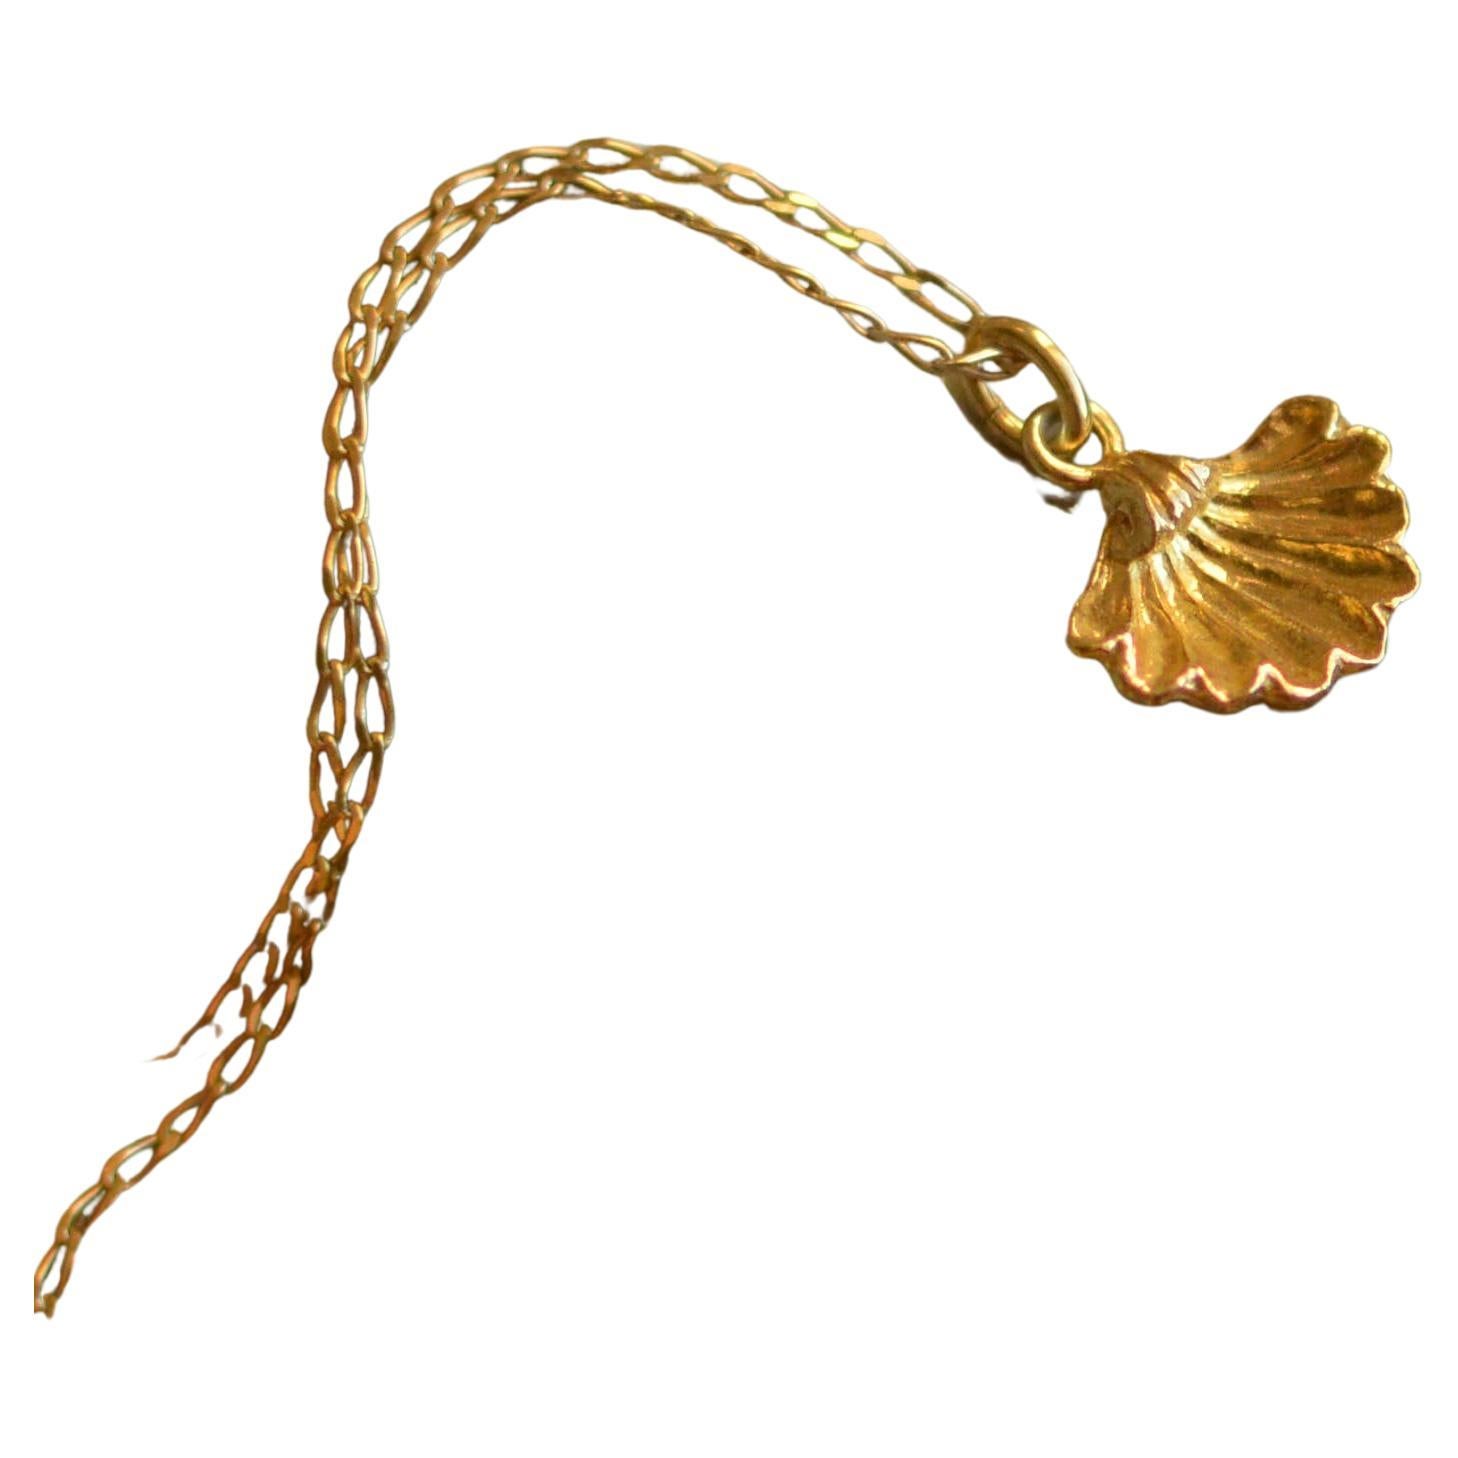 This tiny little shell pendant is cast in solid 18 Carat gold and finished by hand, and is created from Lucy's original hand-sculpted design. 

This beautiful scallop shell pendant is made in London, United Kingdom using recycled or Fairtrade Gold.